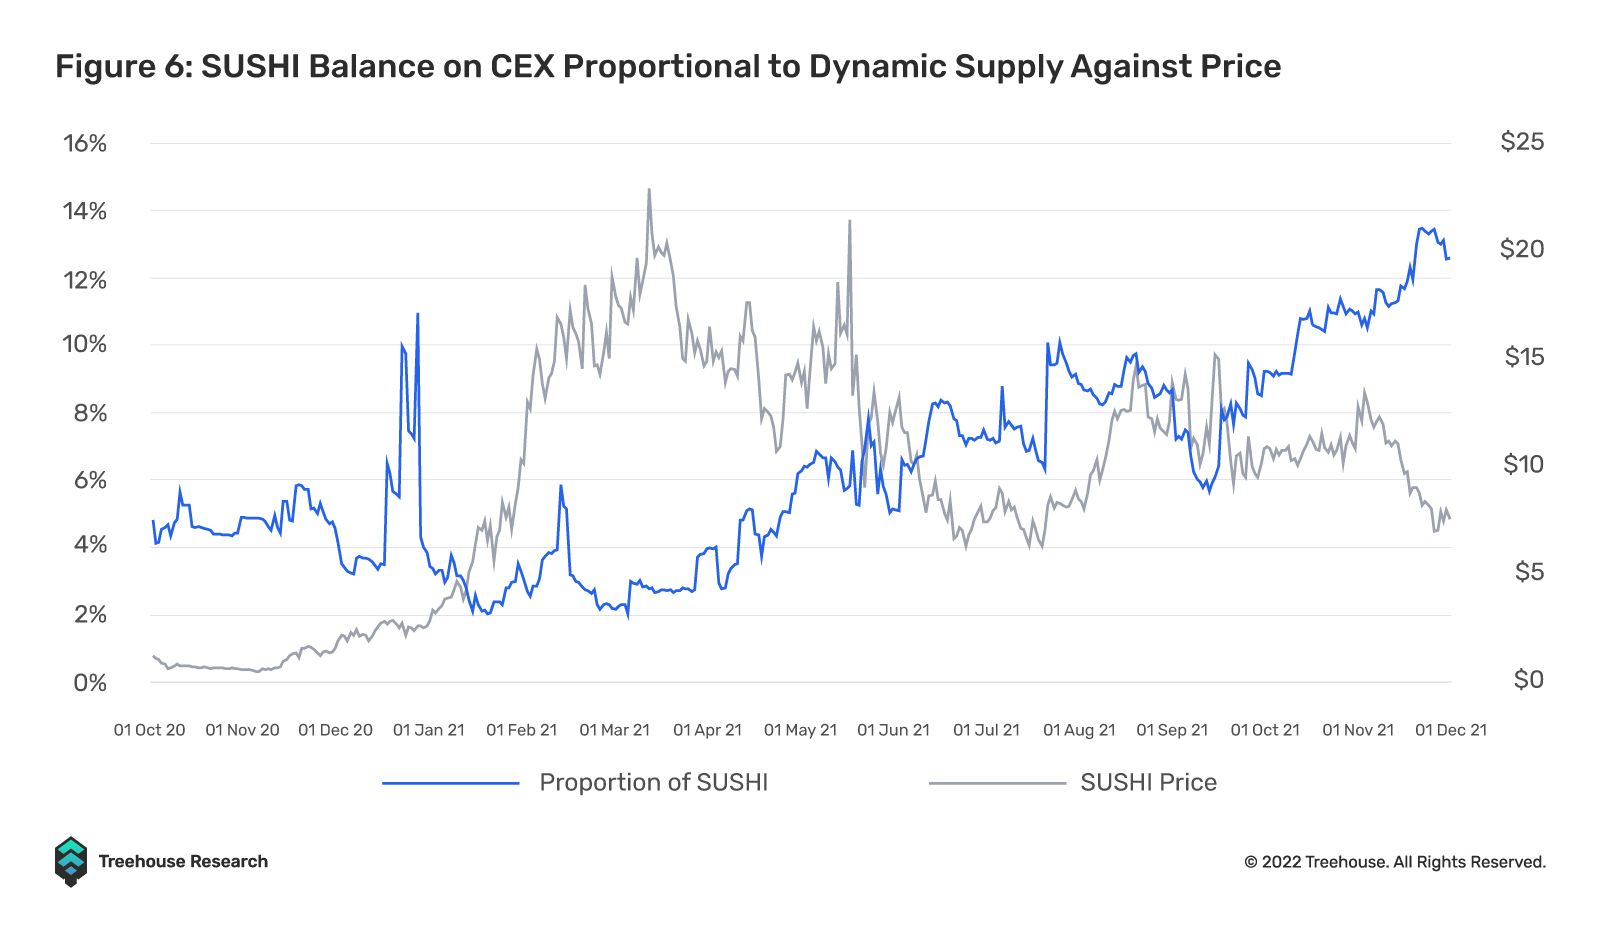 SUSHI balance on CEX proportional to dynamic supply against price 